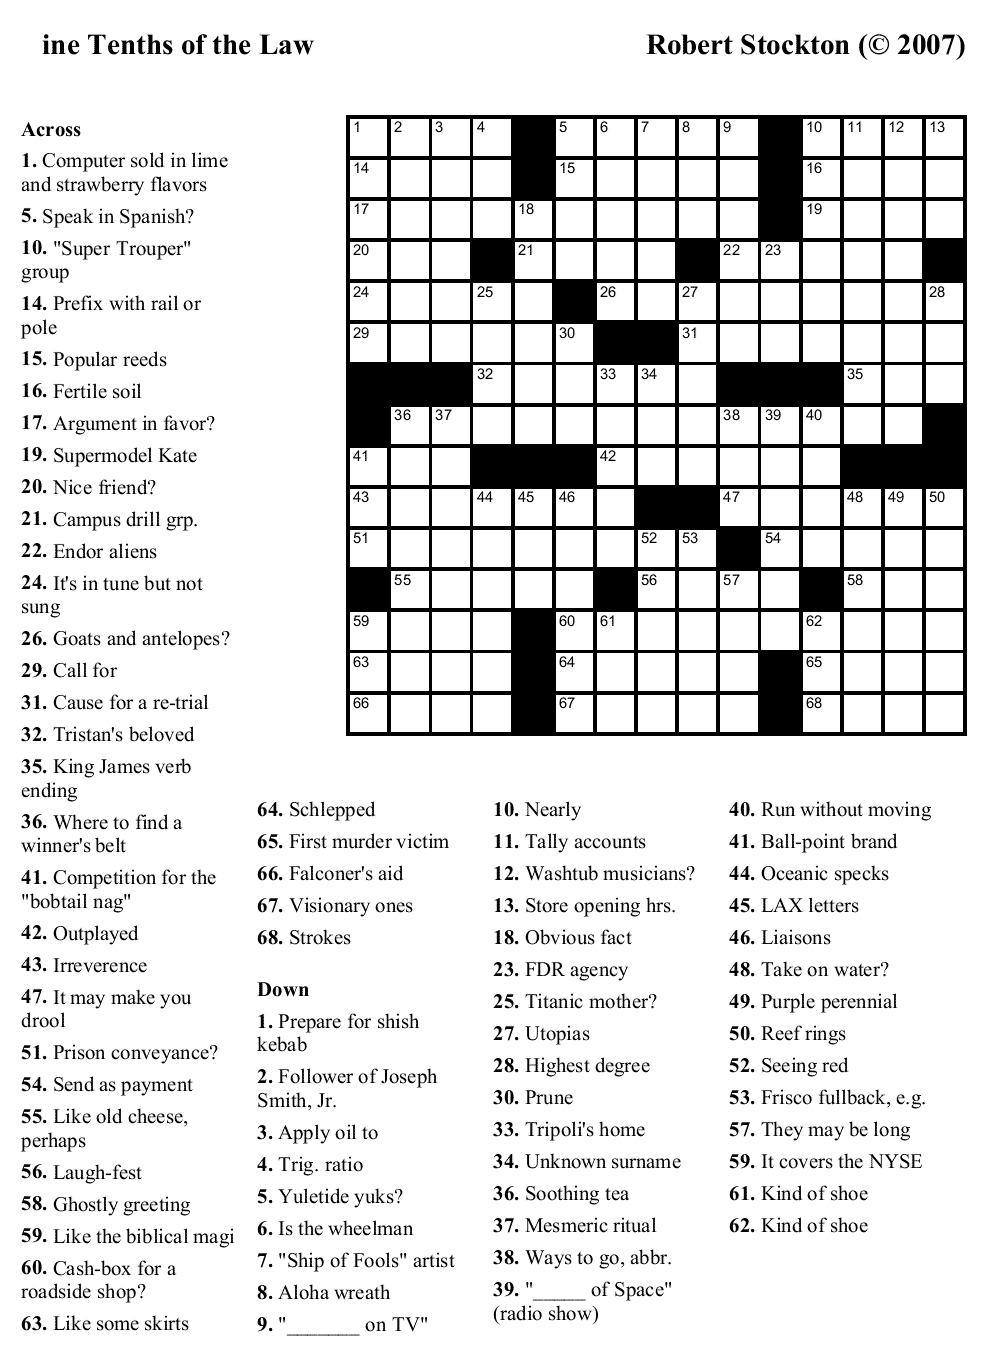 Crossword Puzzles Printable - Yahoo Image Search Results | Crossword - Printable Puzzles And Crosswords